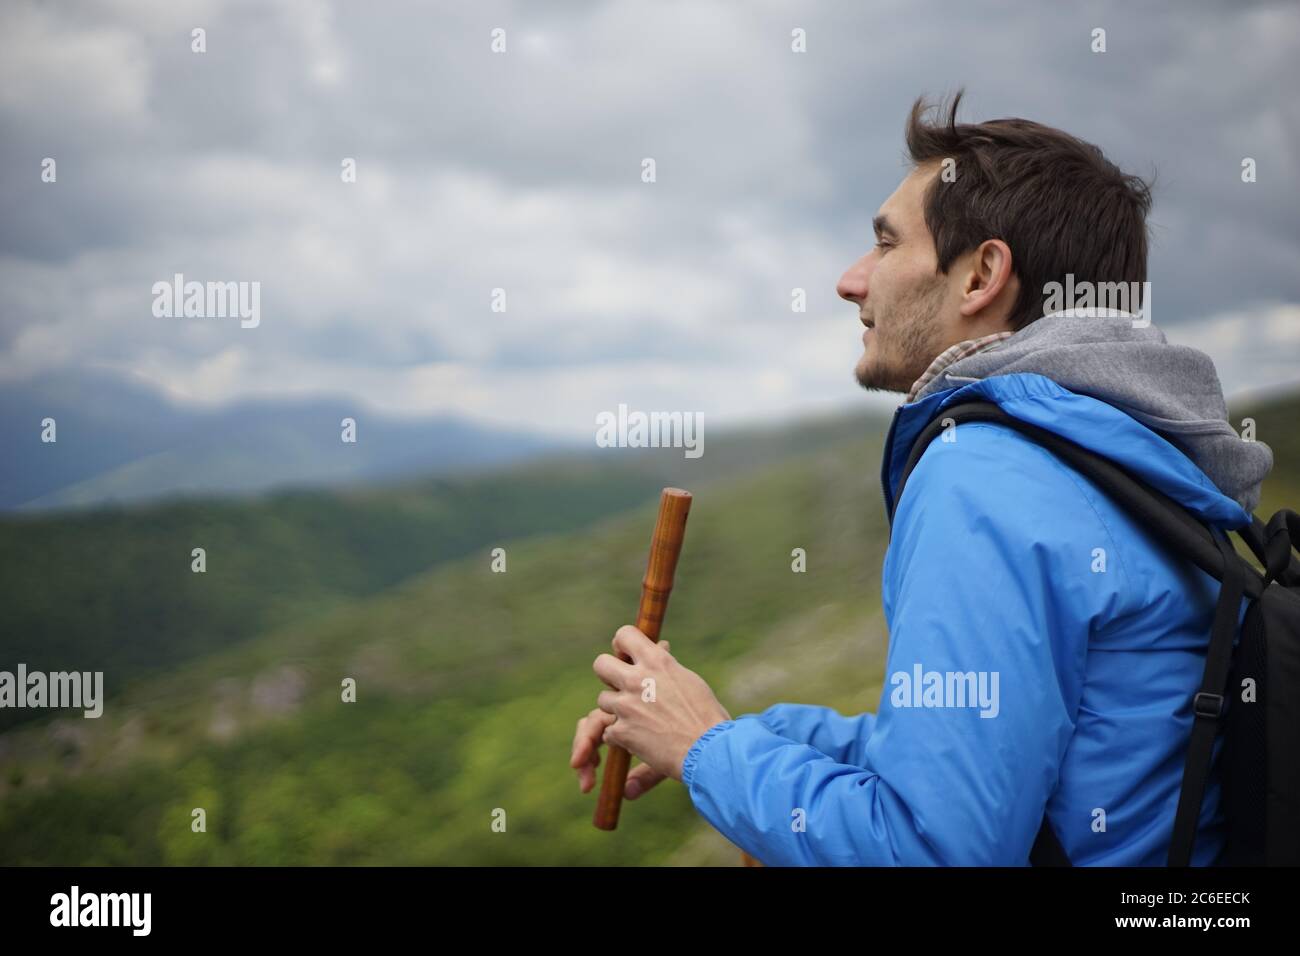 A side view of a young male tourist playing a wooden reed-pipe/ flute. He is on the summit of Stara Planina (Balkan Mountains). Stock Photo